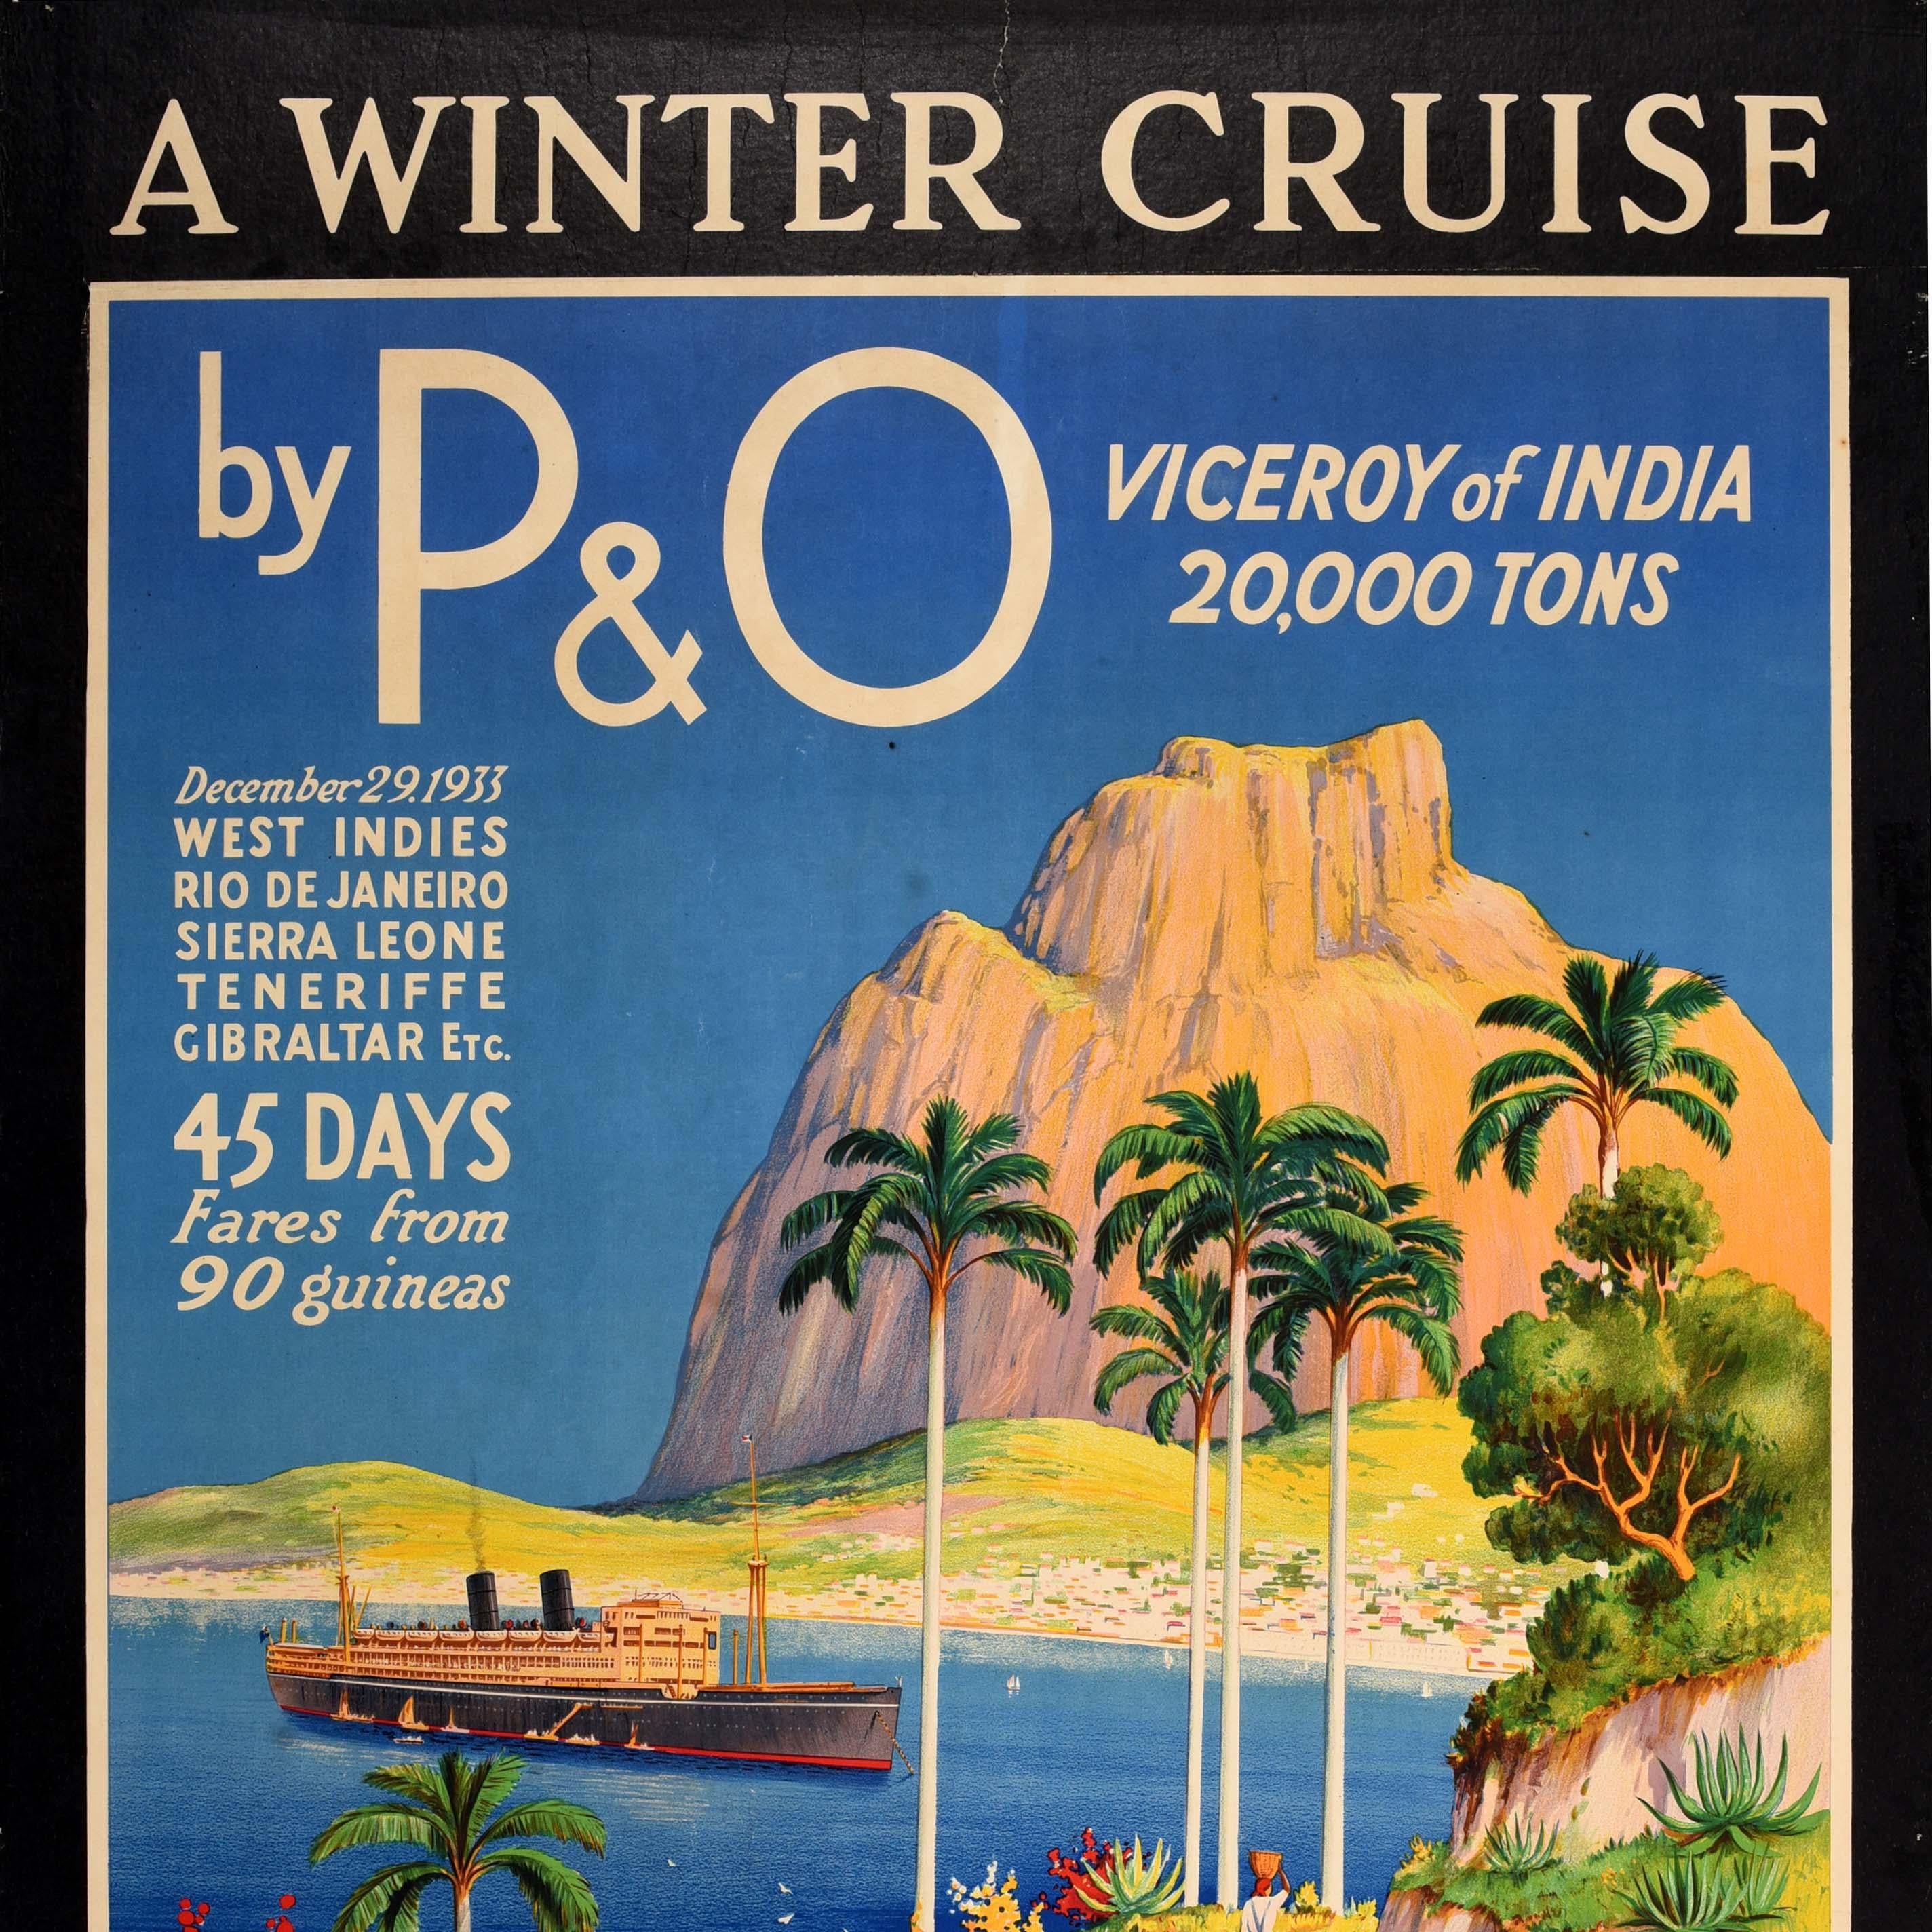 Original vintage travel poster advertising A Winter Cruise by P&O on the Viceroy of India departing on 29 December 1933 on a 45 day trip visiting West Indies Rio de Janeiro Sierra Leone Teneriffe Gibraltar Etc. with Fares from 90 guineas. Stunning